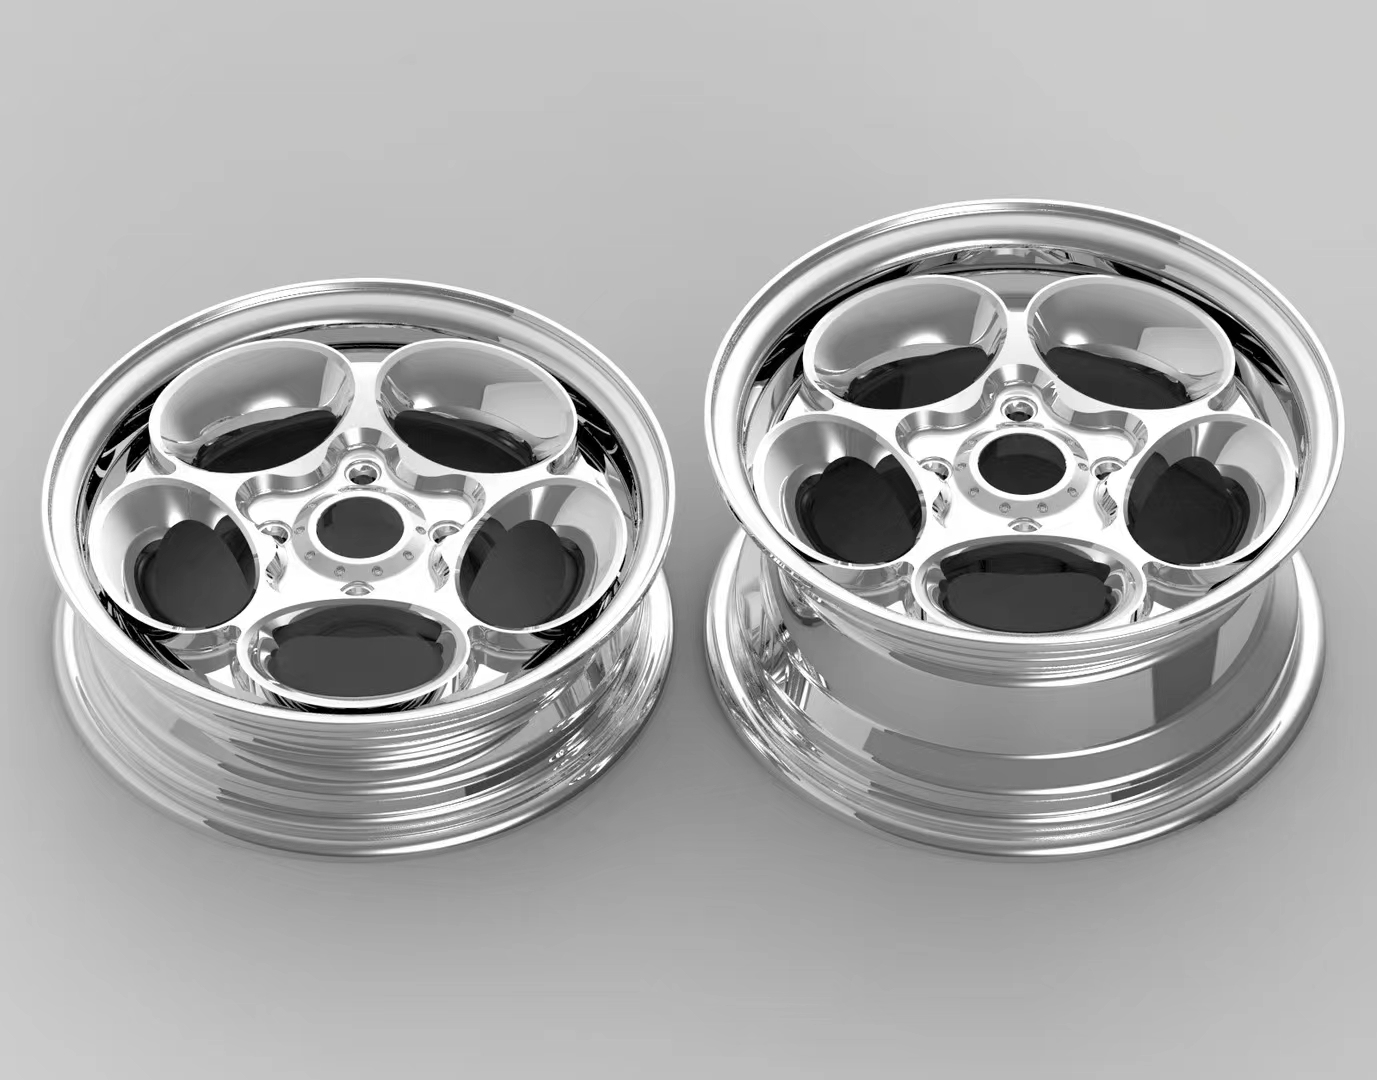 Super Cool Motorcycle 3-piece Forged Wheel 12 Inch All Polished OZ replica rim